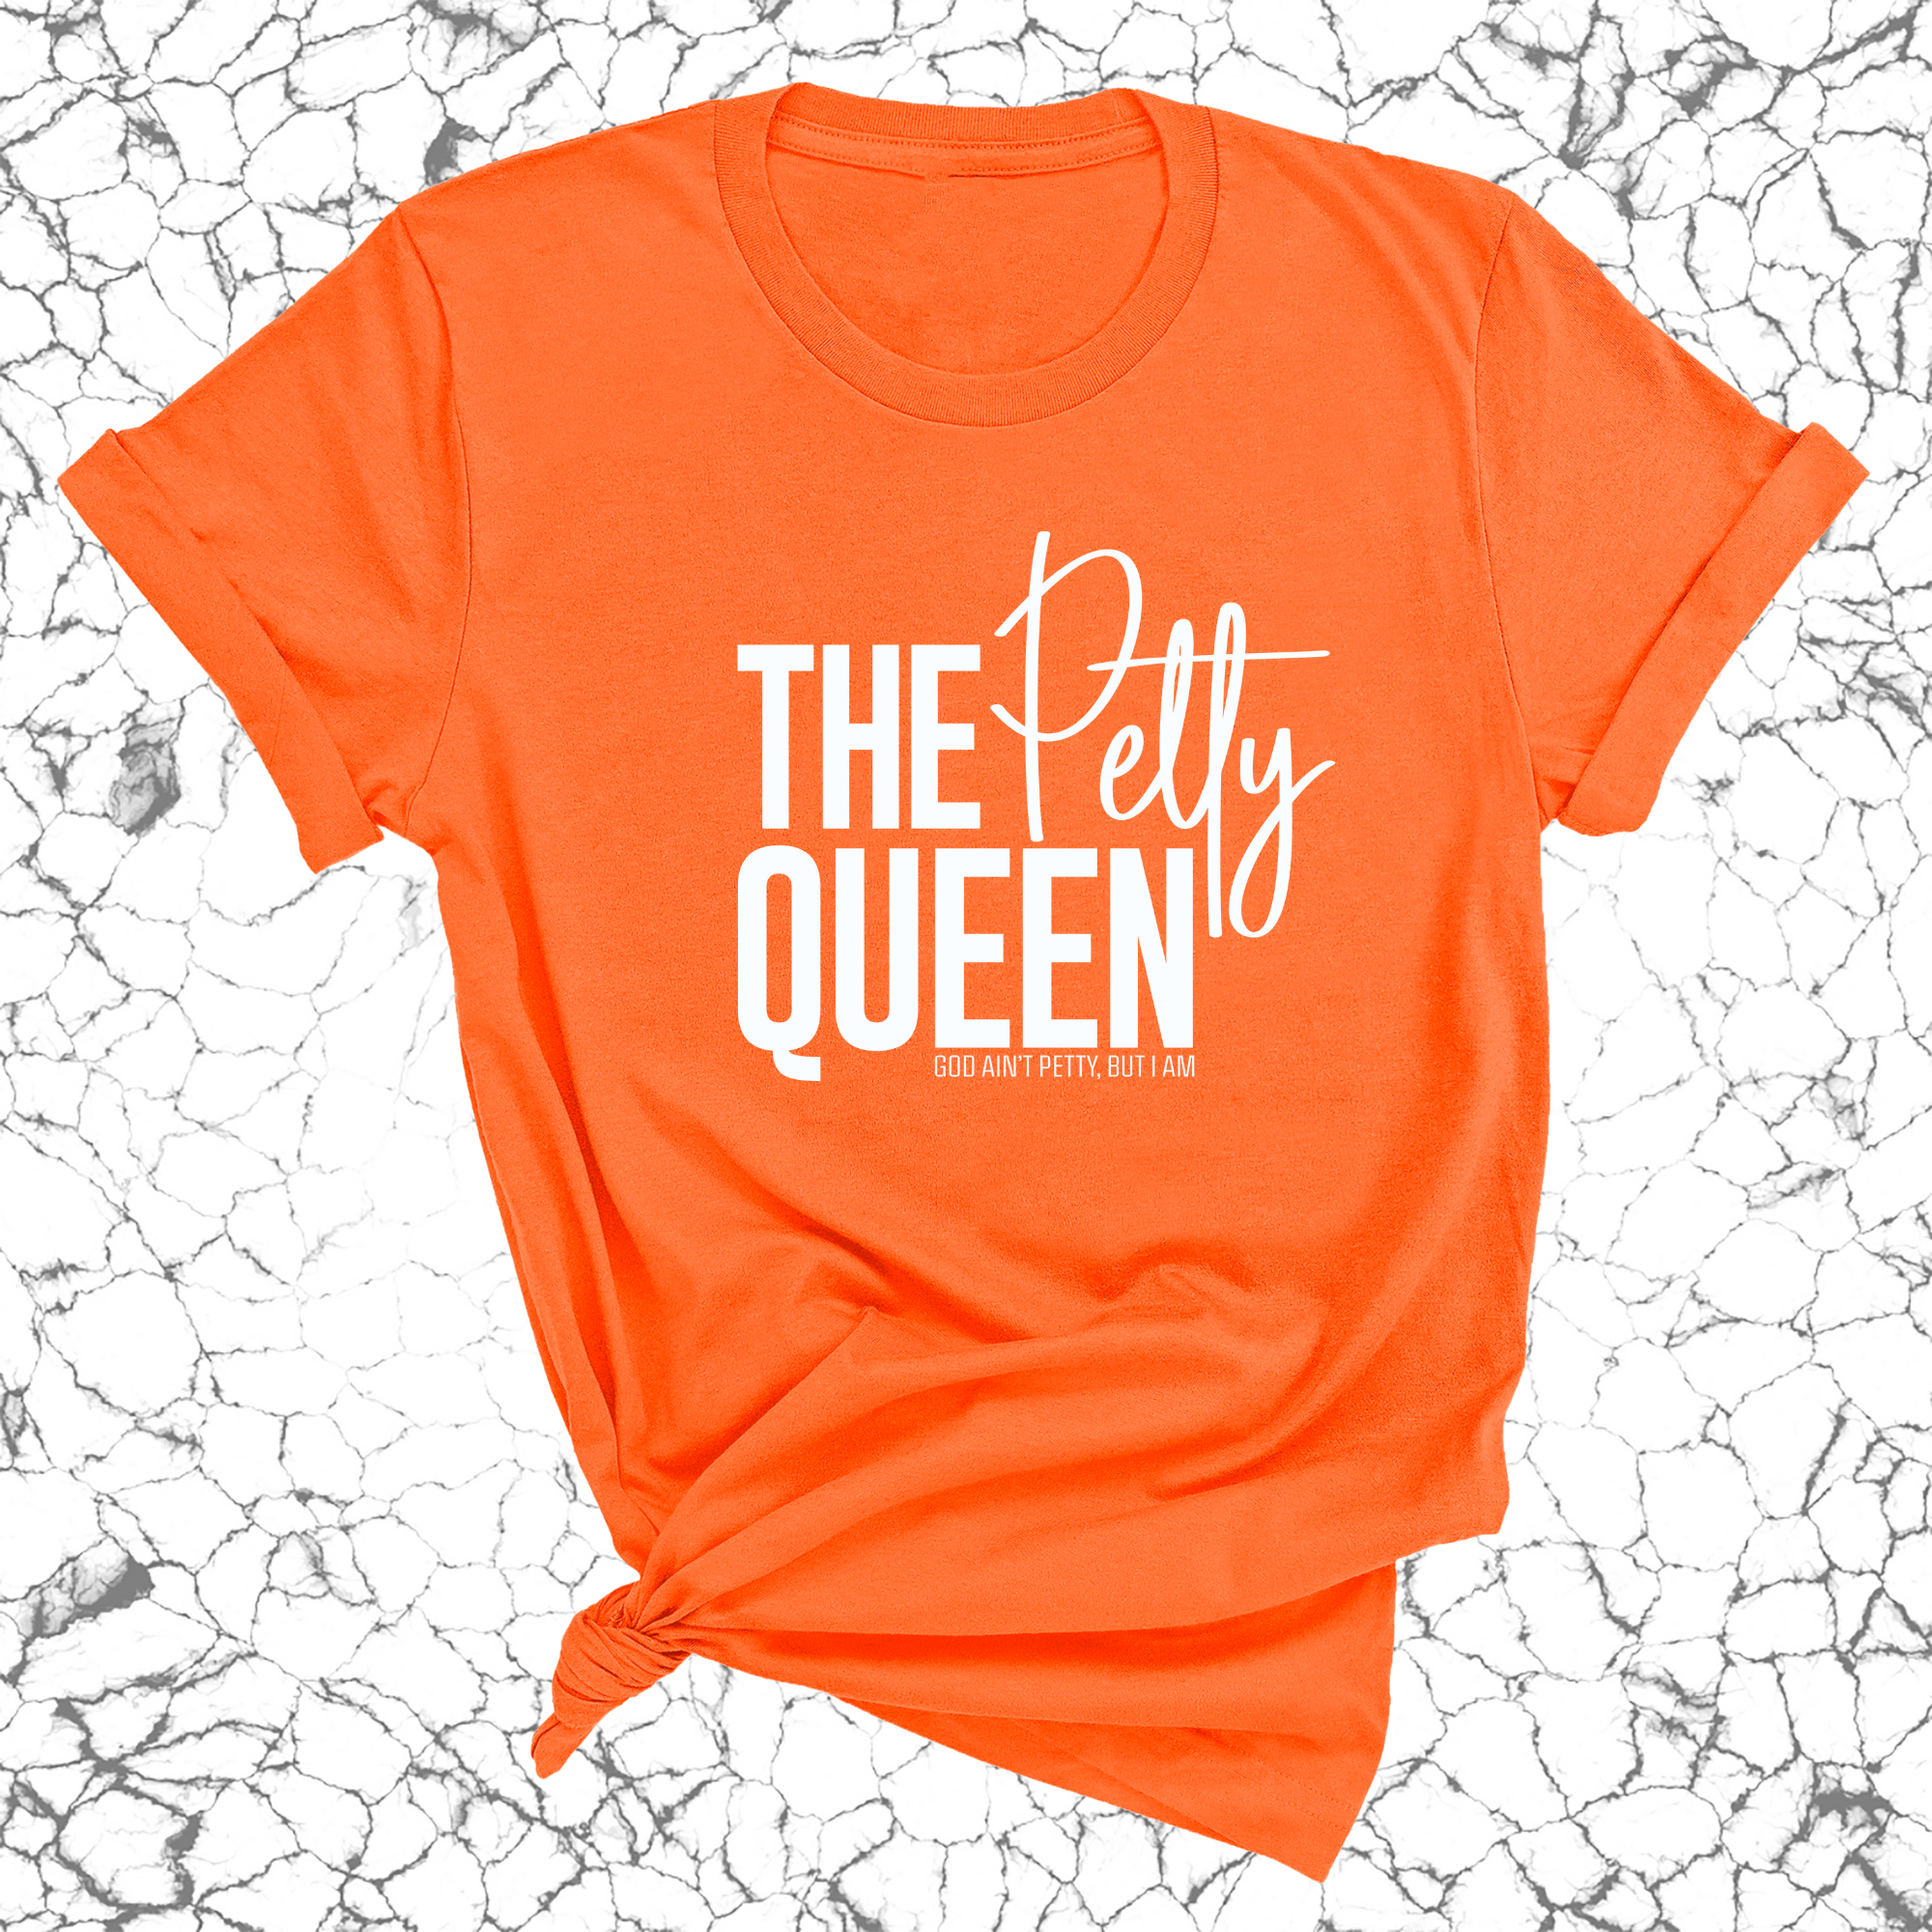 The Petty Queen Unisex Tee-T-Shirt-The Original God Ain't Petty But I Am